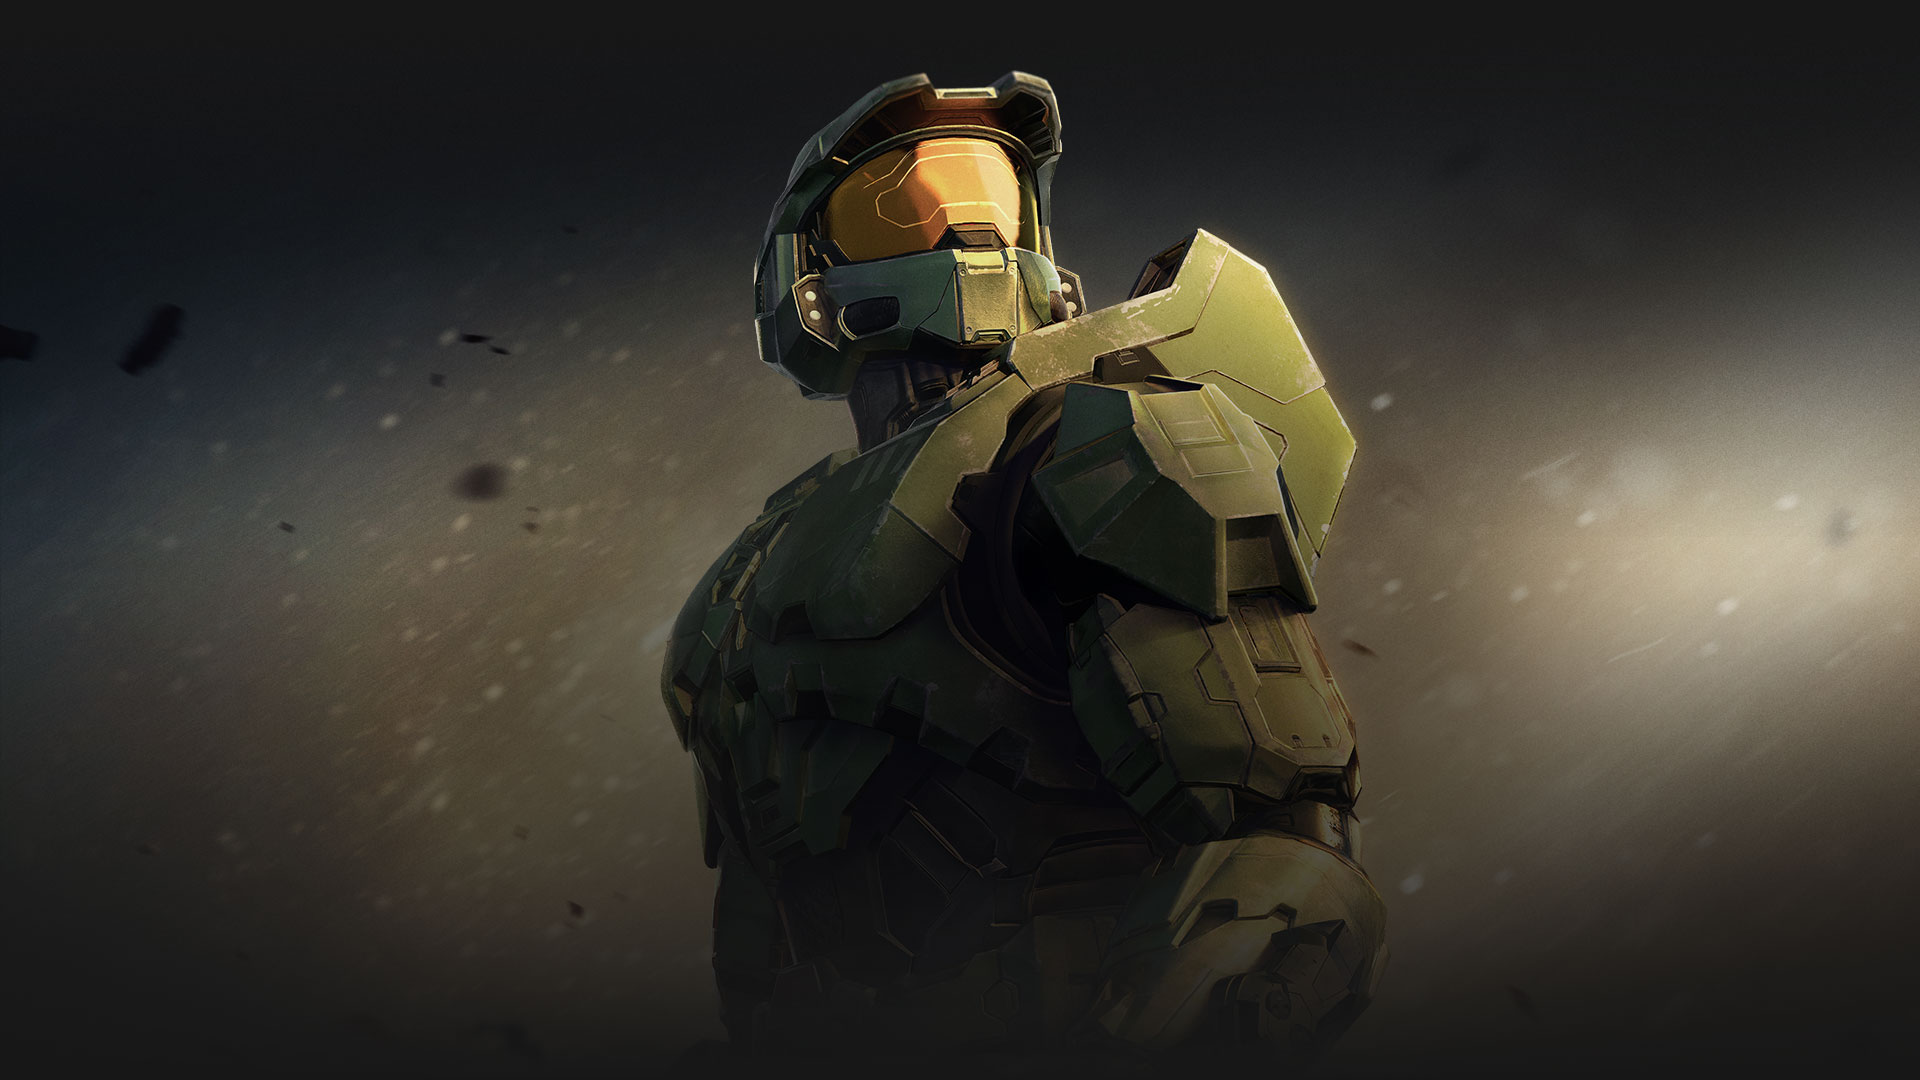 Master Chief looking into the distance